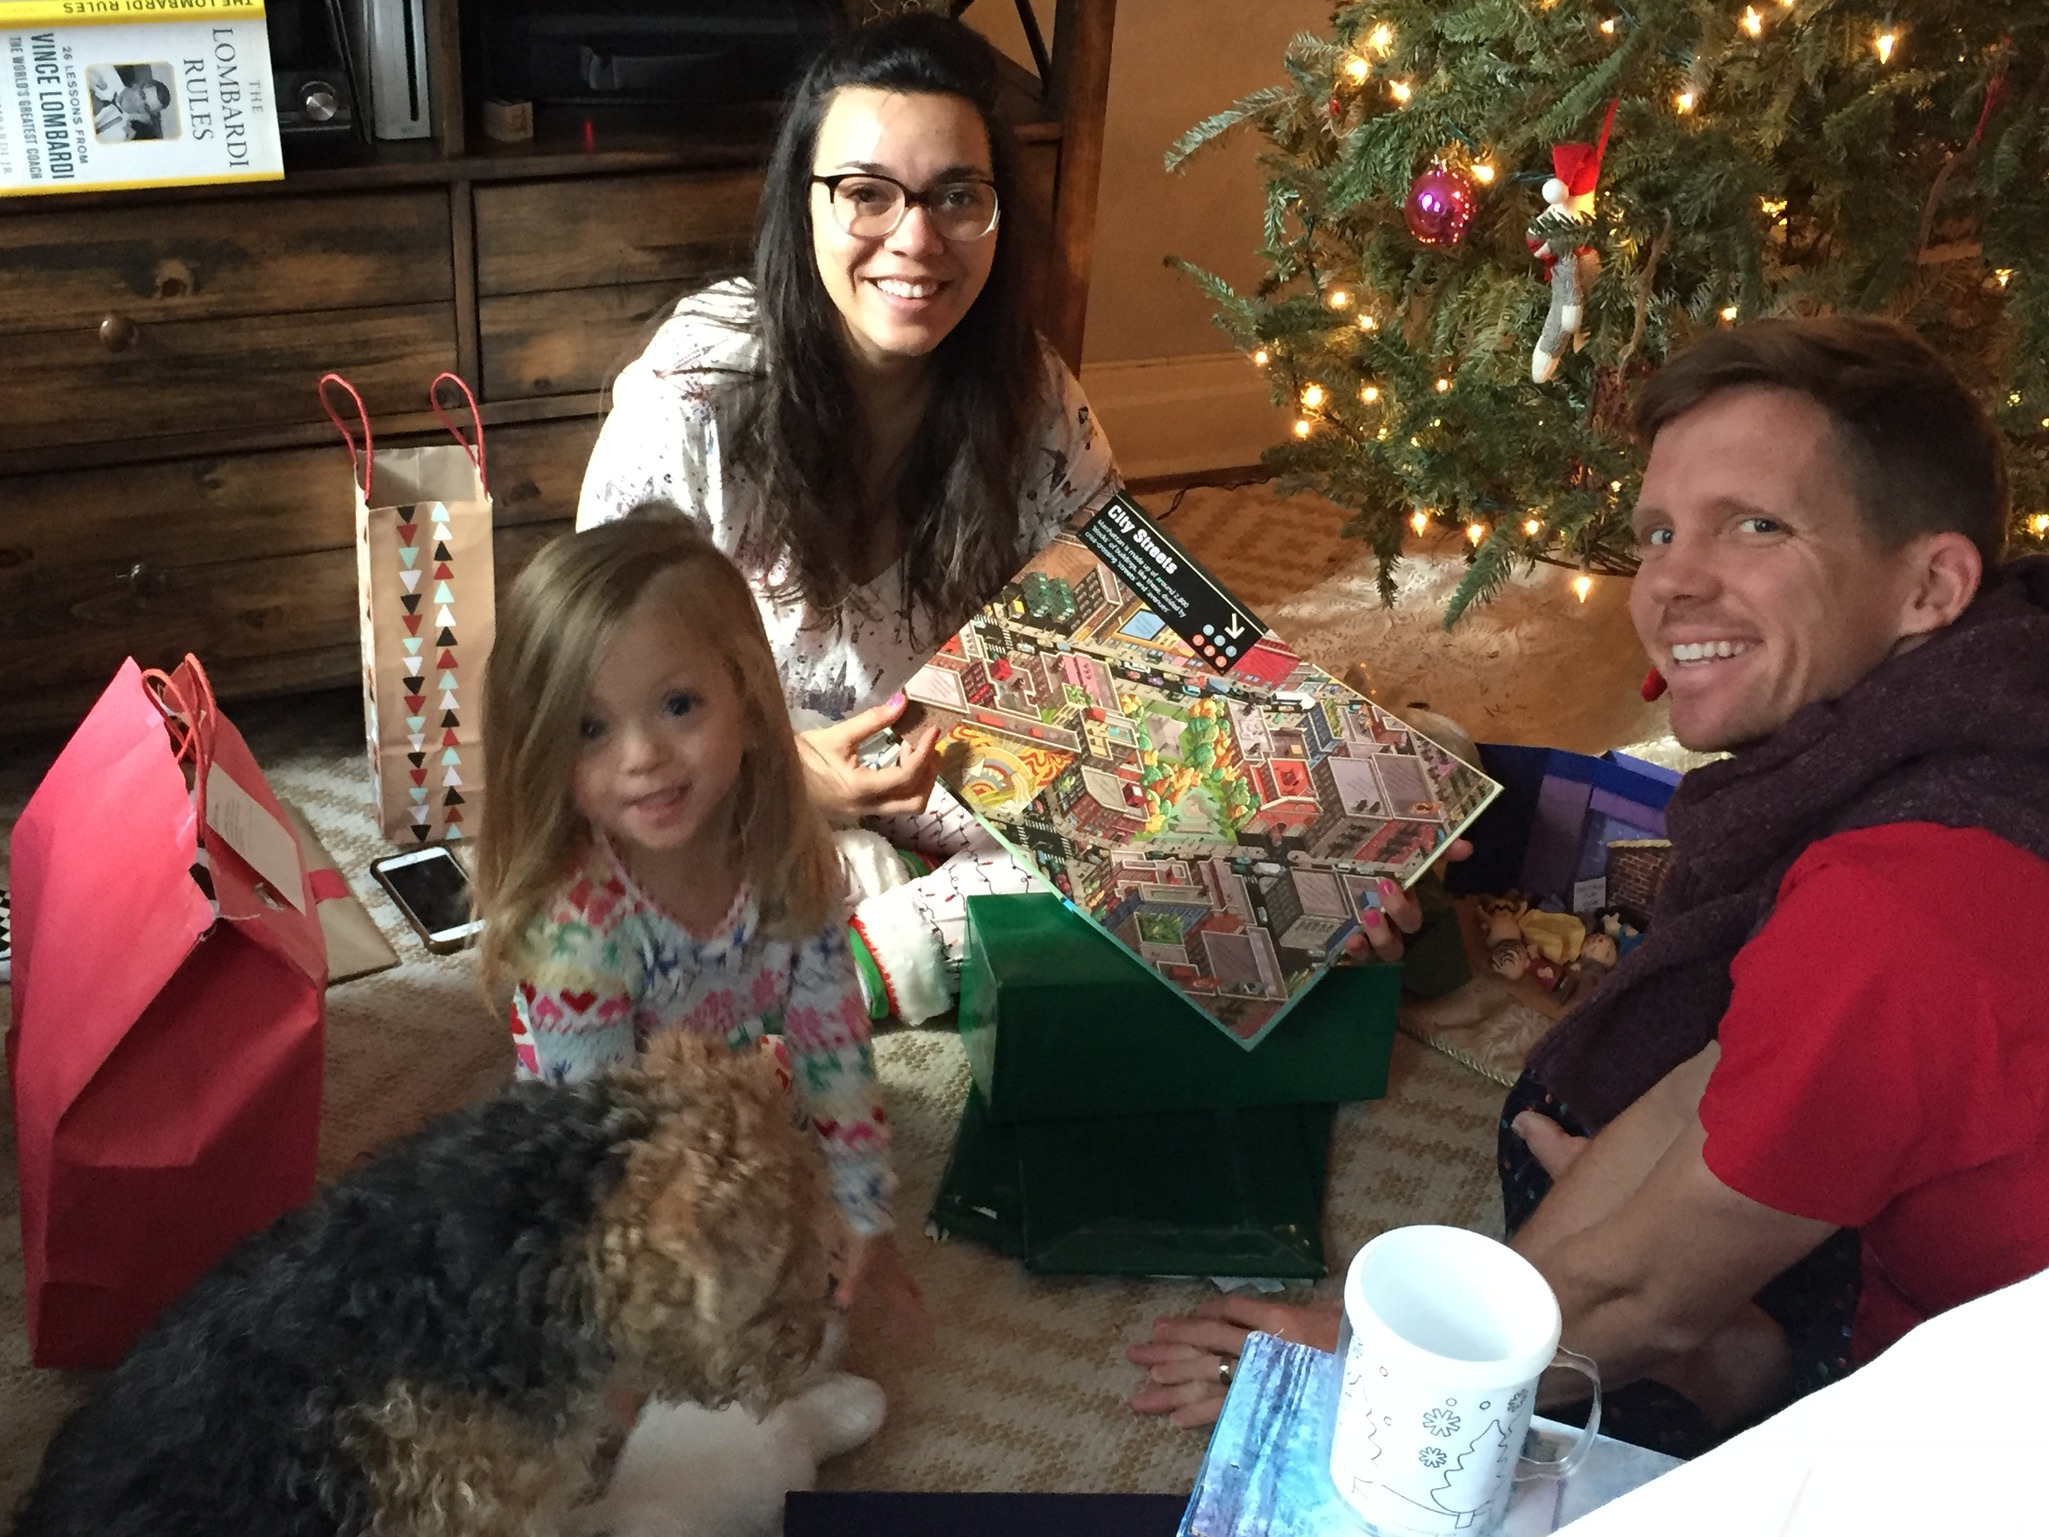  Opening gifts on Christmas morning. 